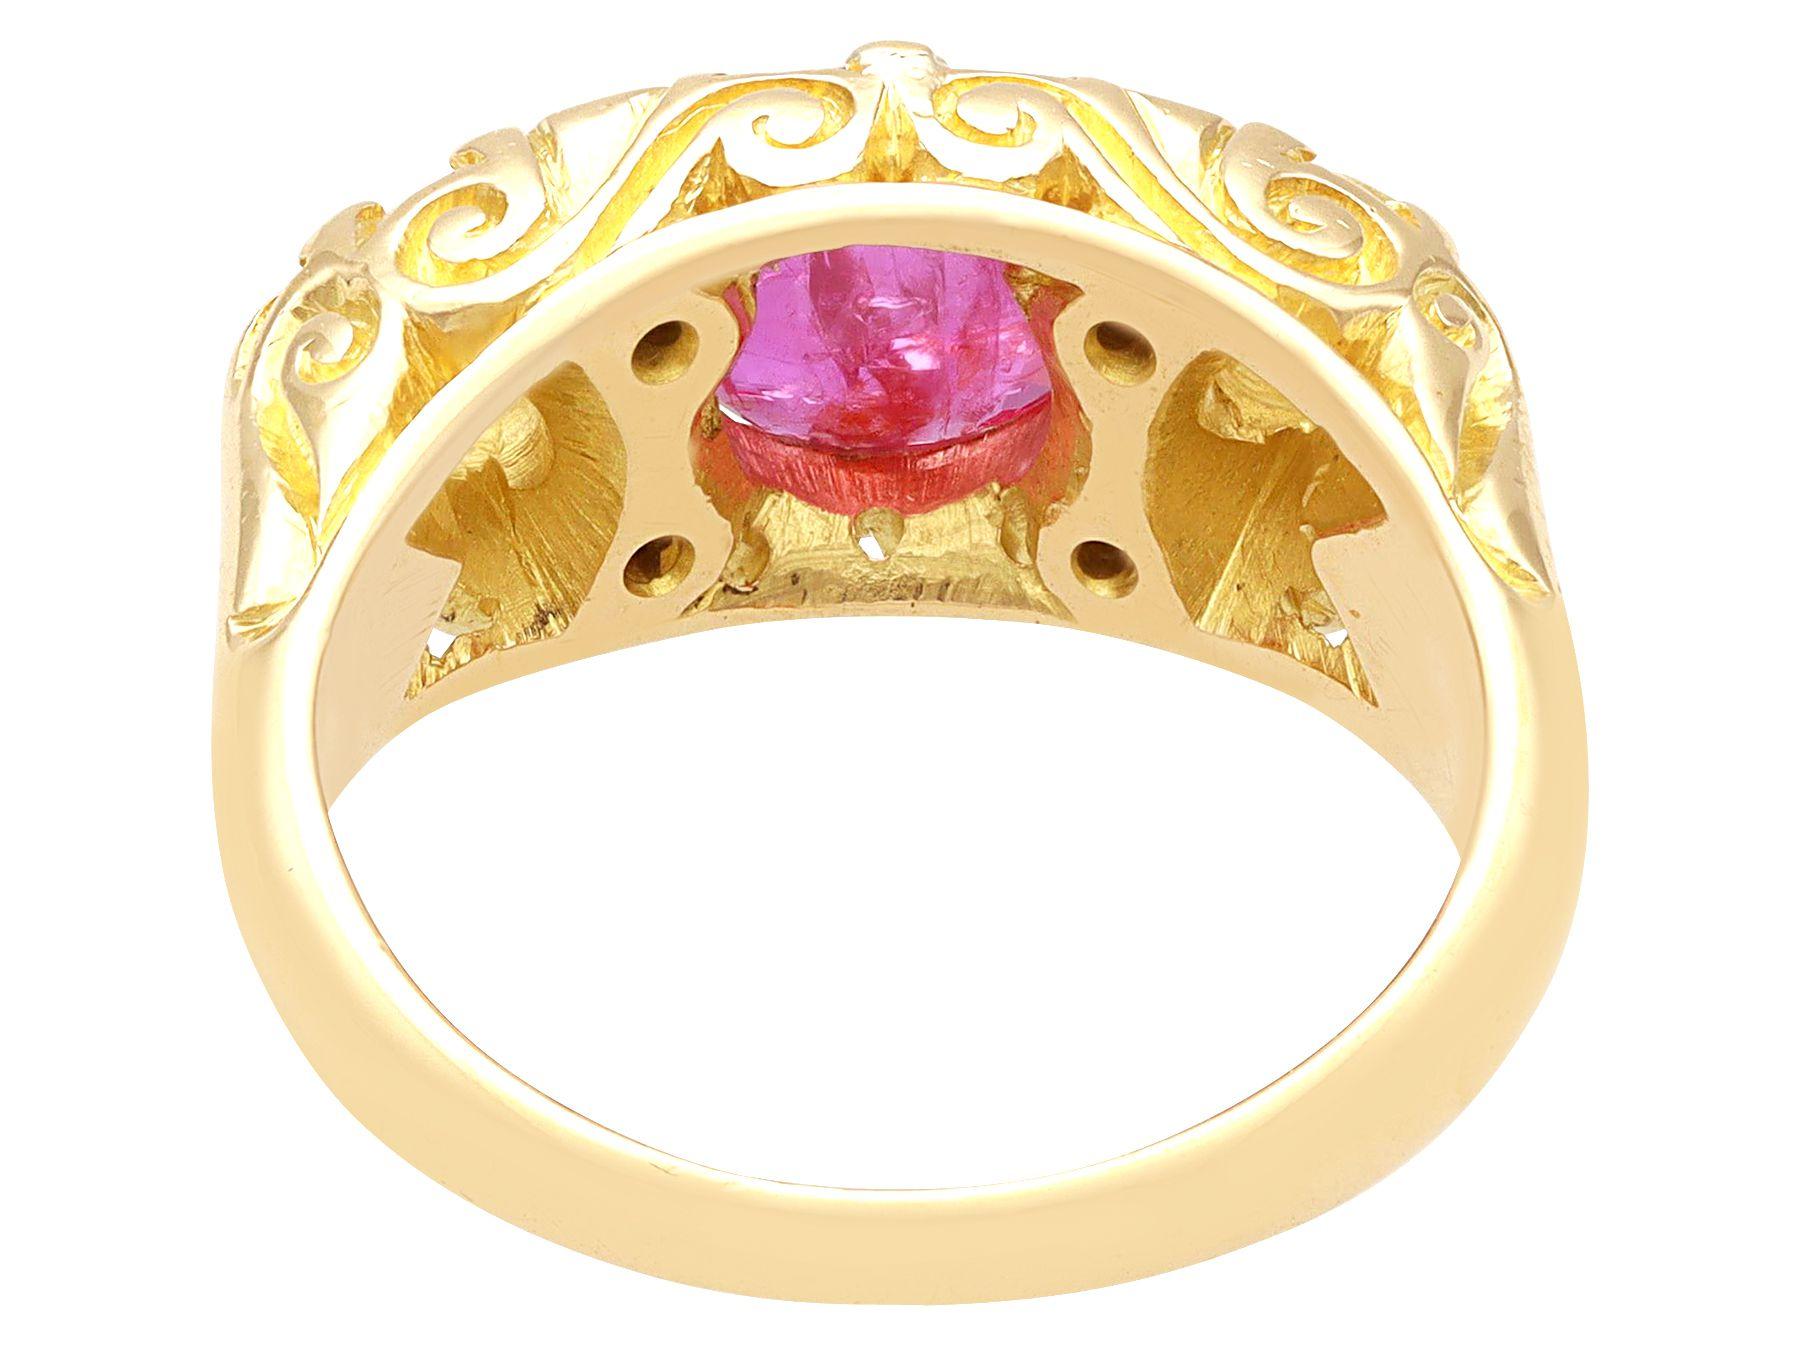 Women's or Men's Antique 1.15 Carat Burmese Ruby and 1.36 Carat Diamond Yellow Gold Trilogy Ring For Sale